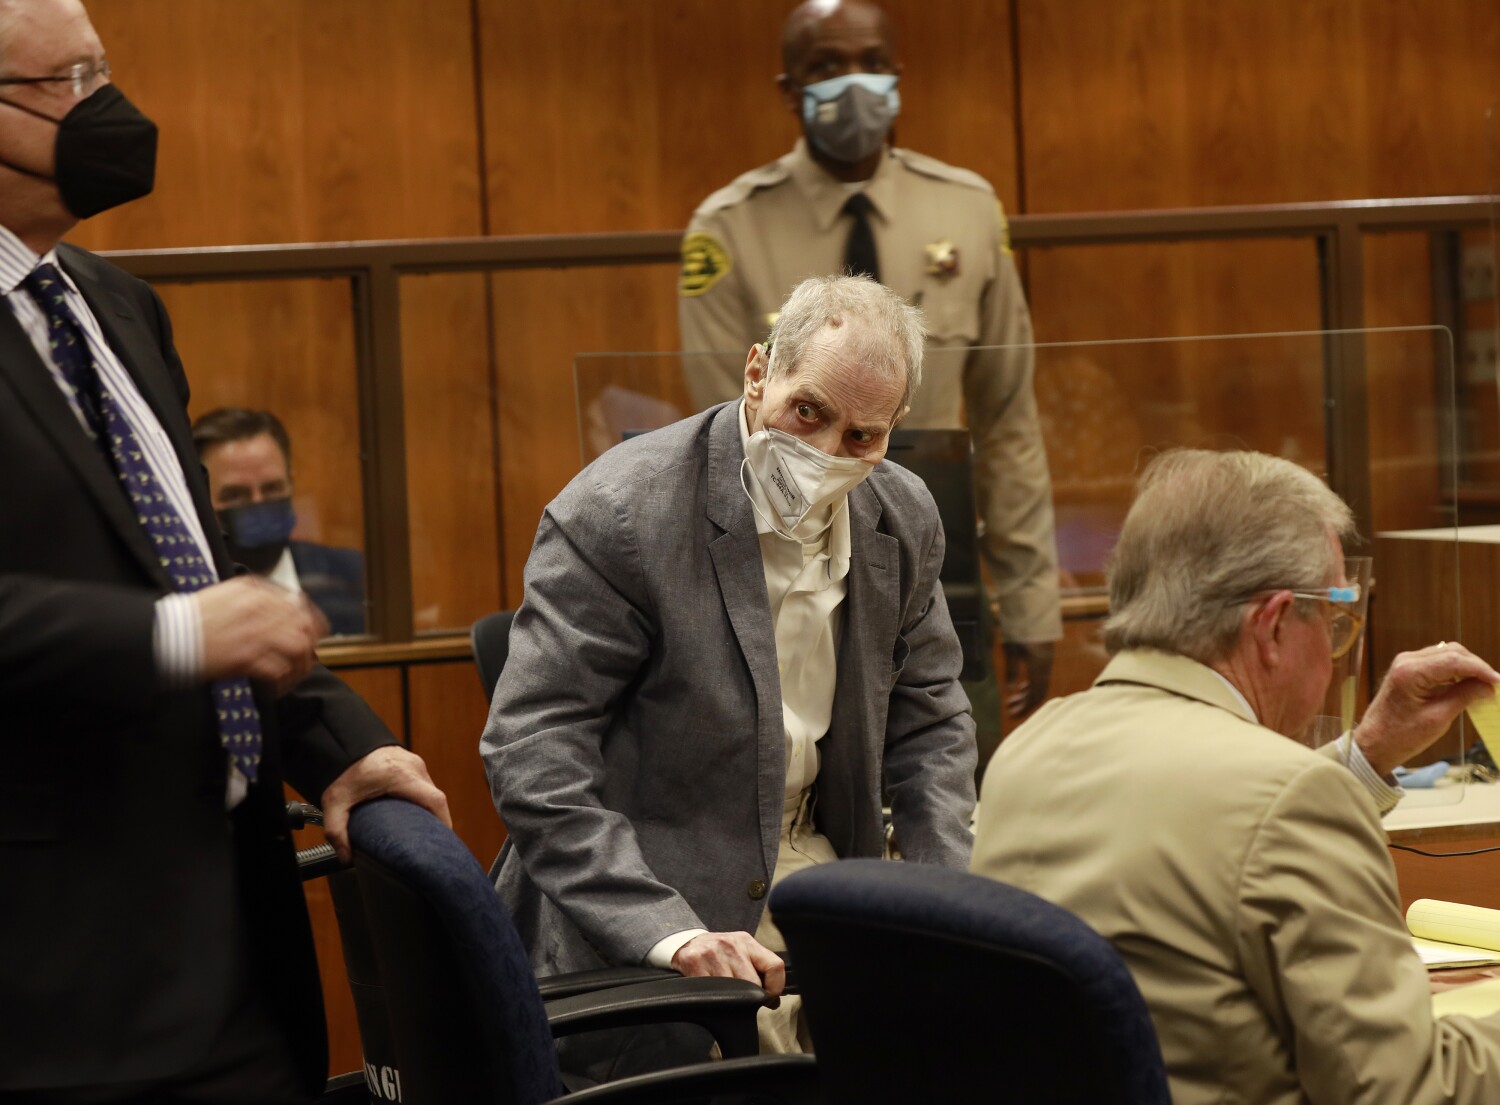 Robert Durst charged with murdering first wife, Kathie, in New York